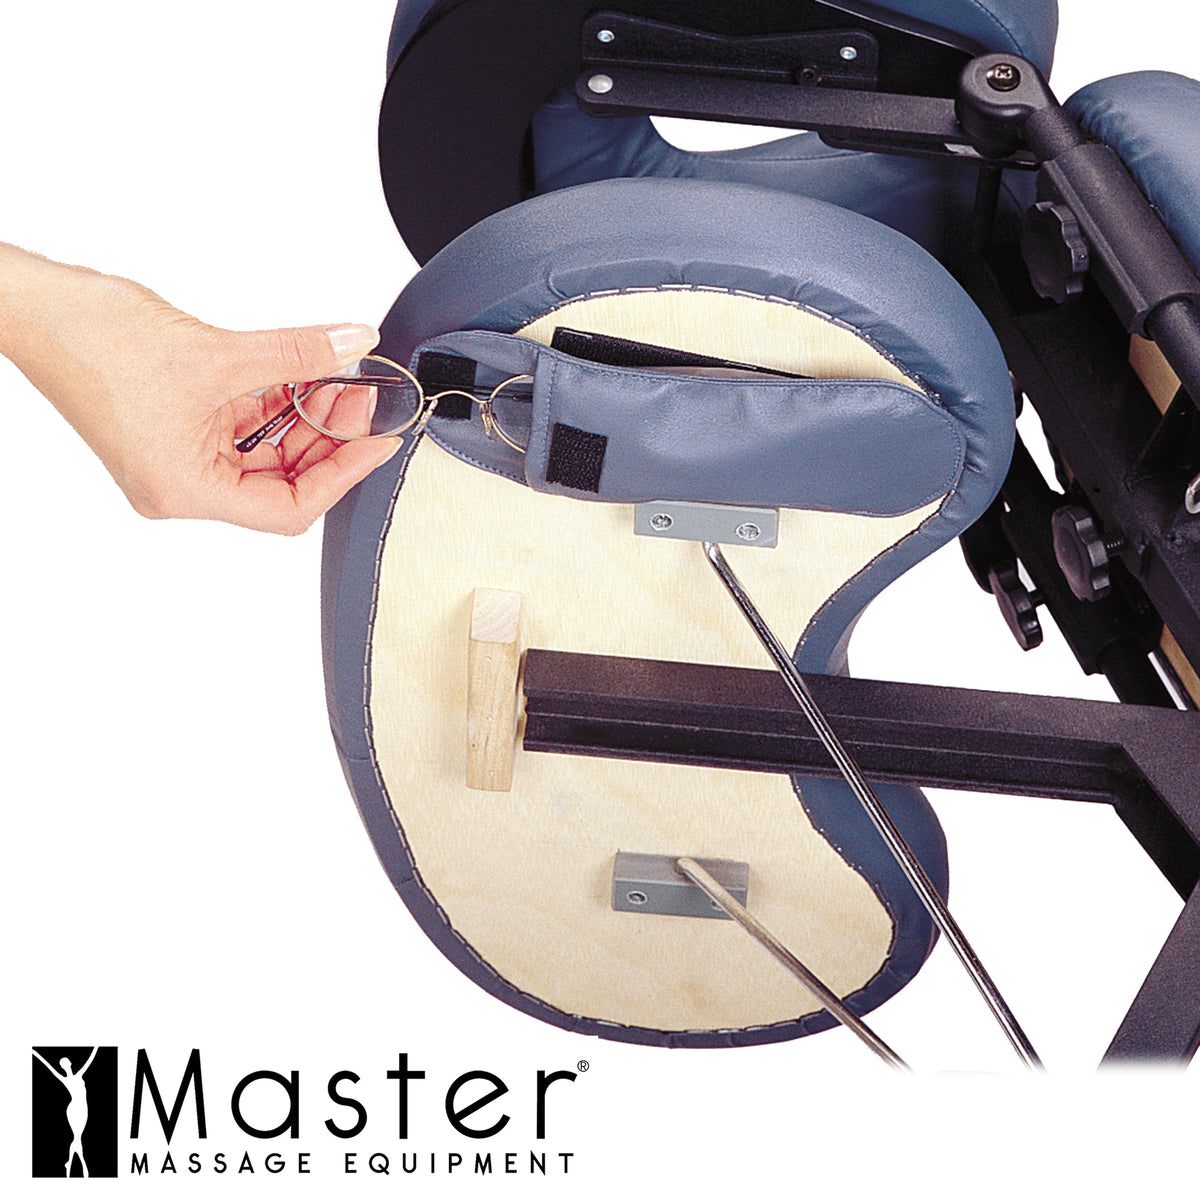 Master Massage - The Professional Portable Massage Chair with Wheeled Case - Superb Massage Tables